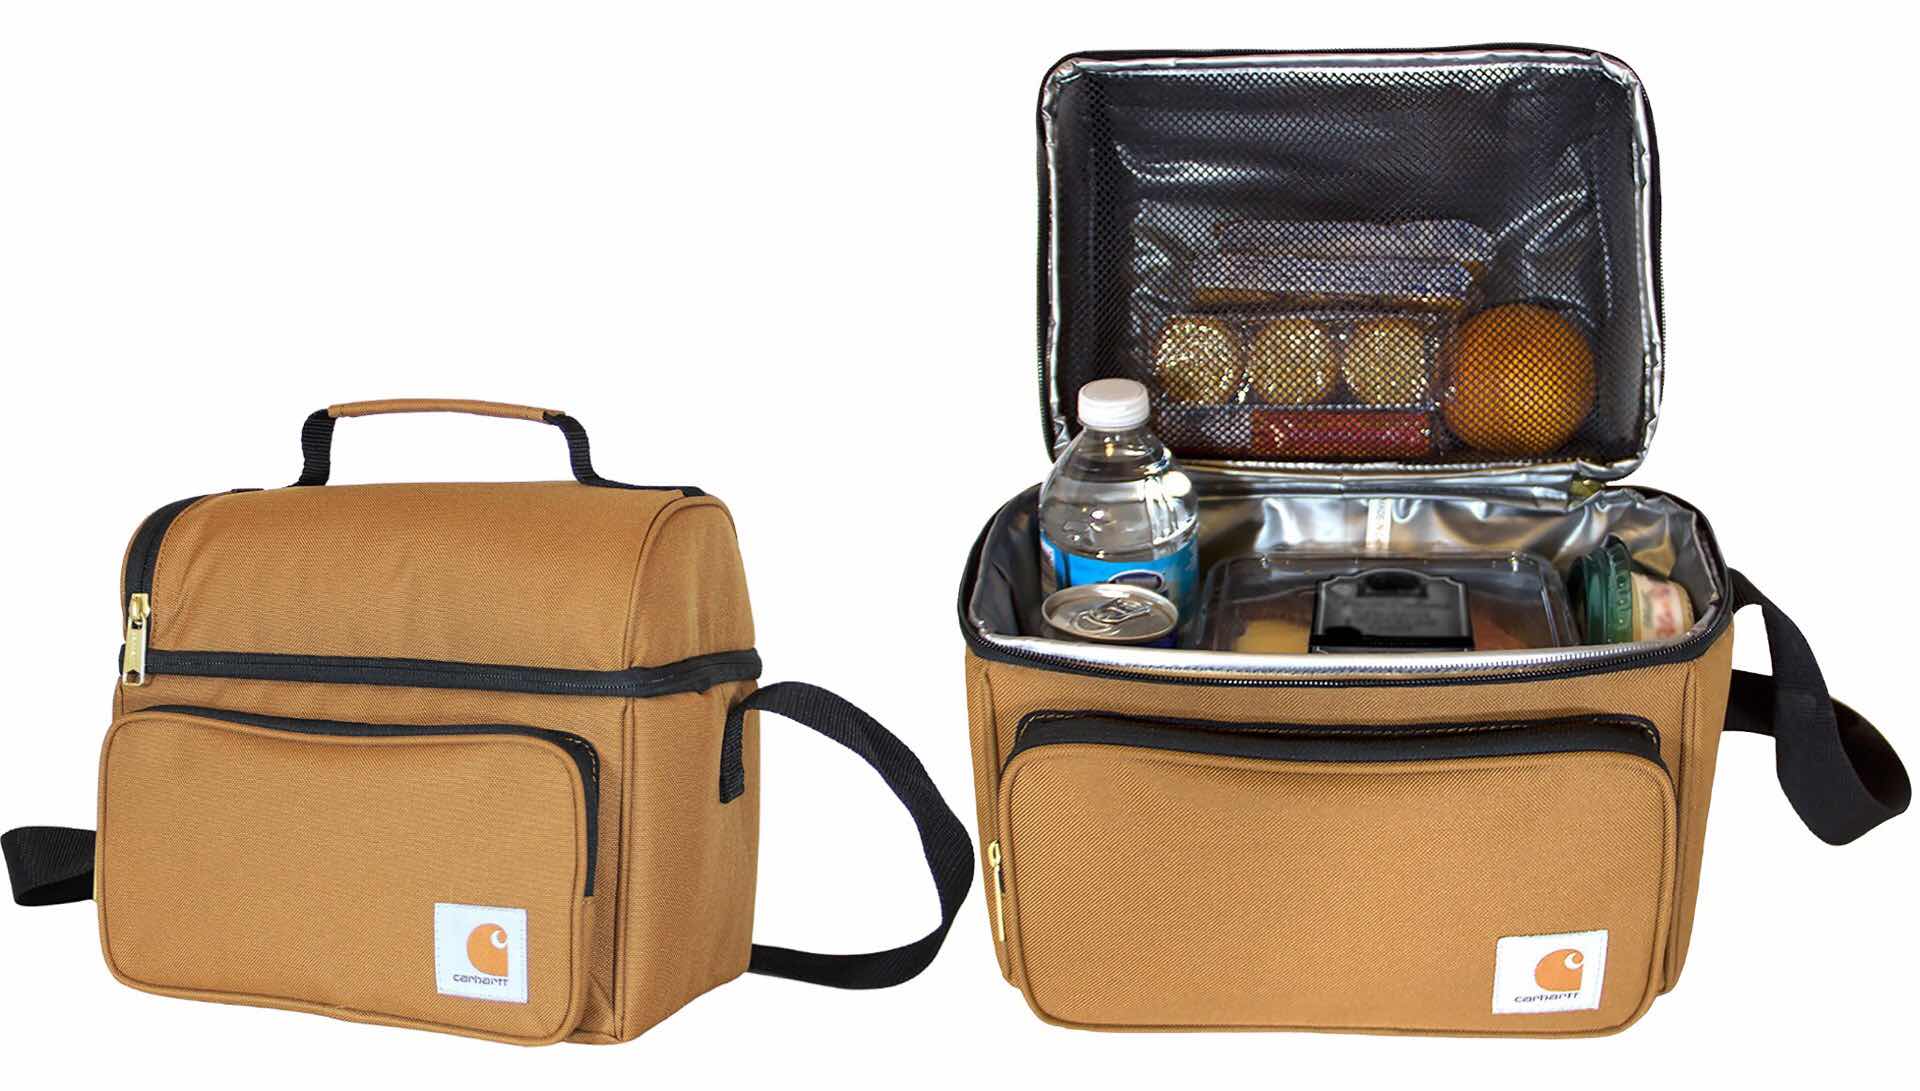 Carhartt Deluxe Dual Compartment Insulated Lunch Cooler Bag Carhartt Brown 